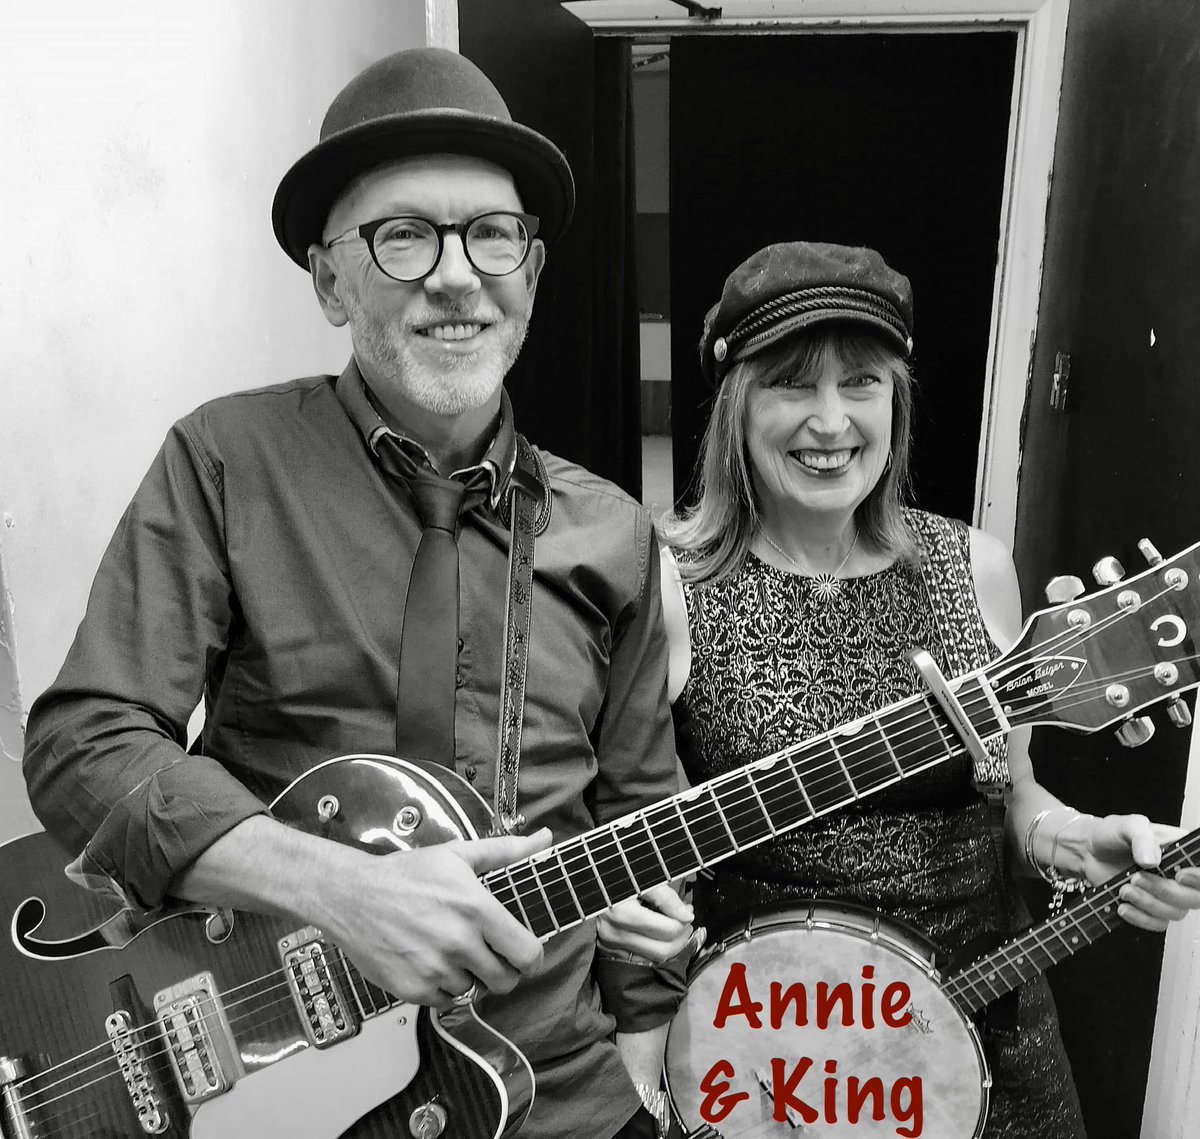 Introducing Annie and King, playing live at the Brewery on March 8th 2024! Annie & King are an acoustic crossover folk duo, who we love having here at the brewery. Hailing from Scarborough they always provide the most amazing shows. Tickets: bit.ly/WTMusicNight